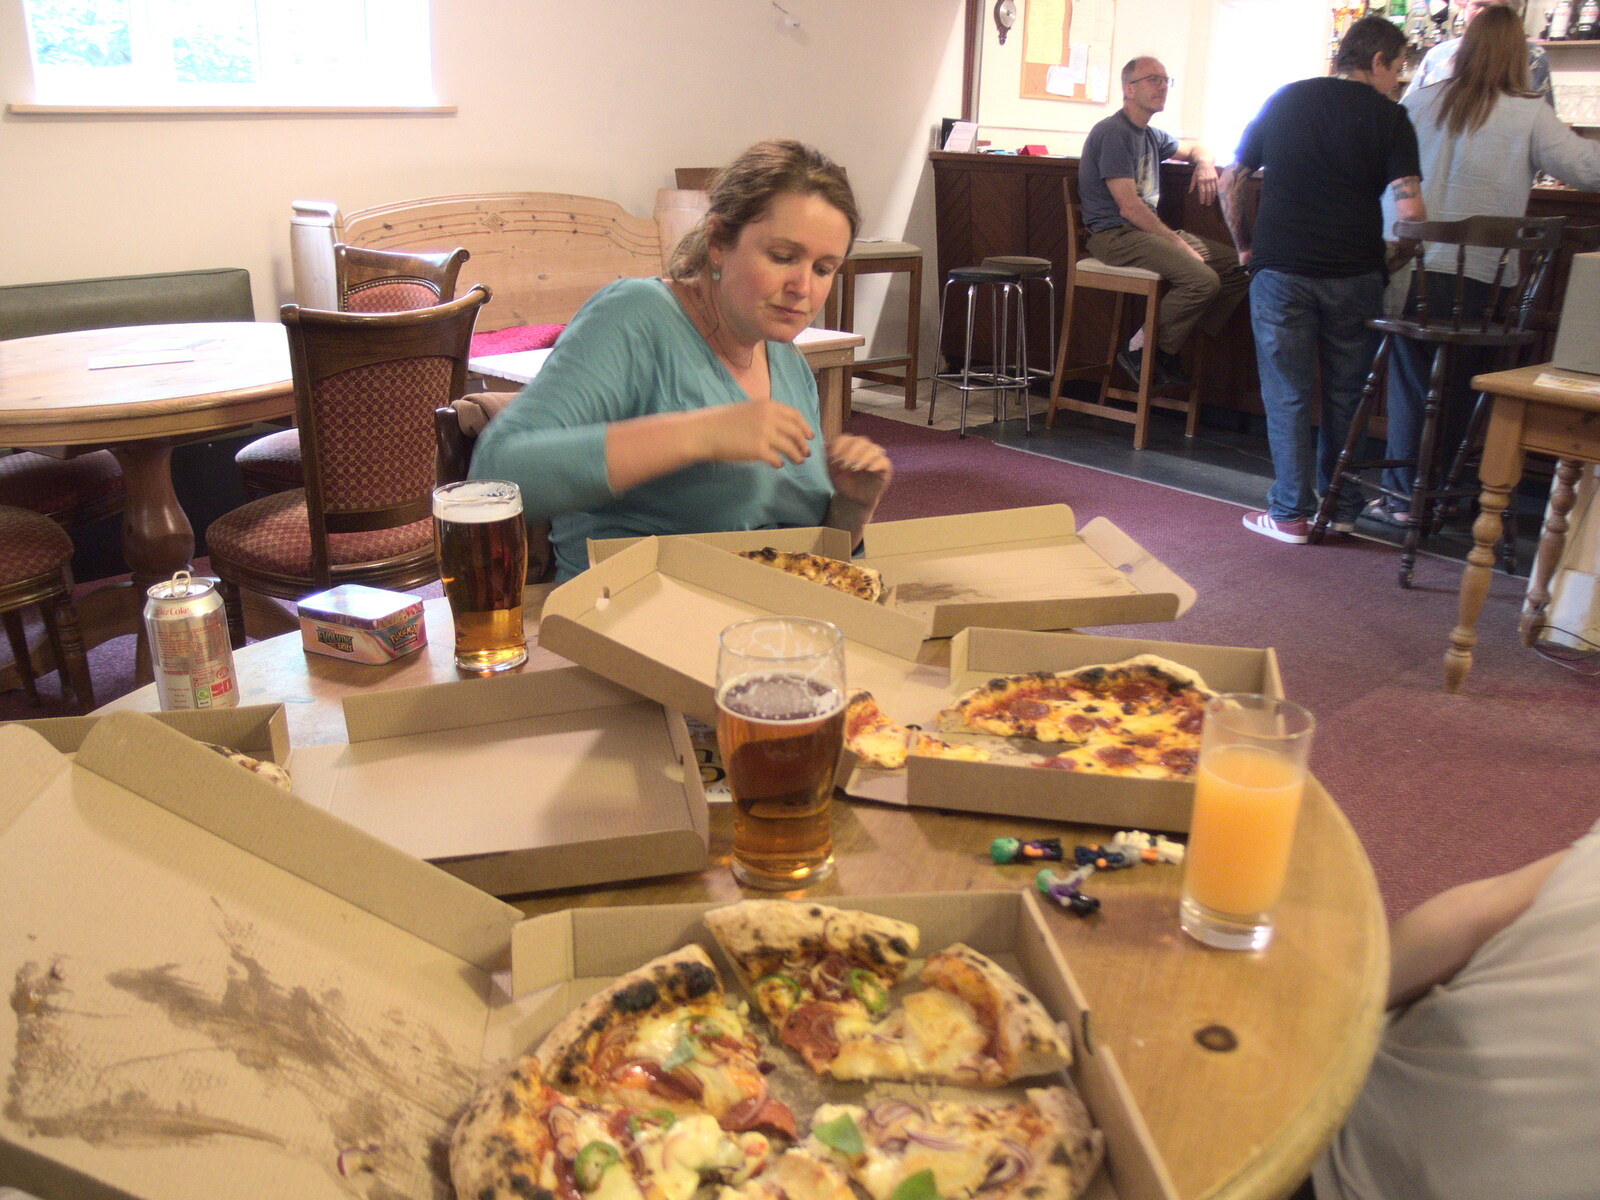 We eat our pizza by the bar from Pizza at the Village Hall, Brome, Suffolk - 24th June 2022